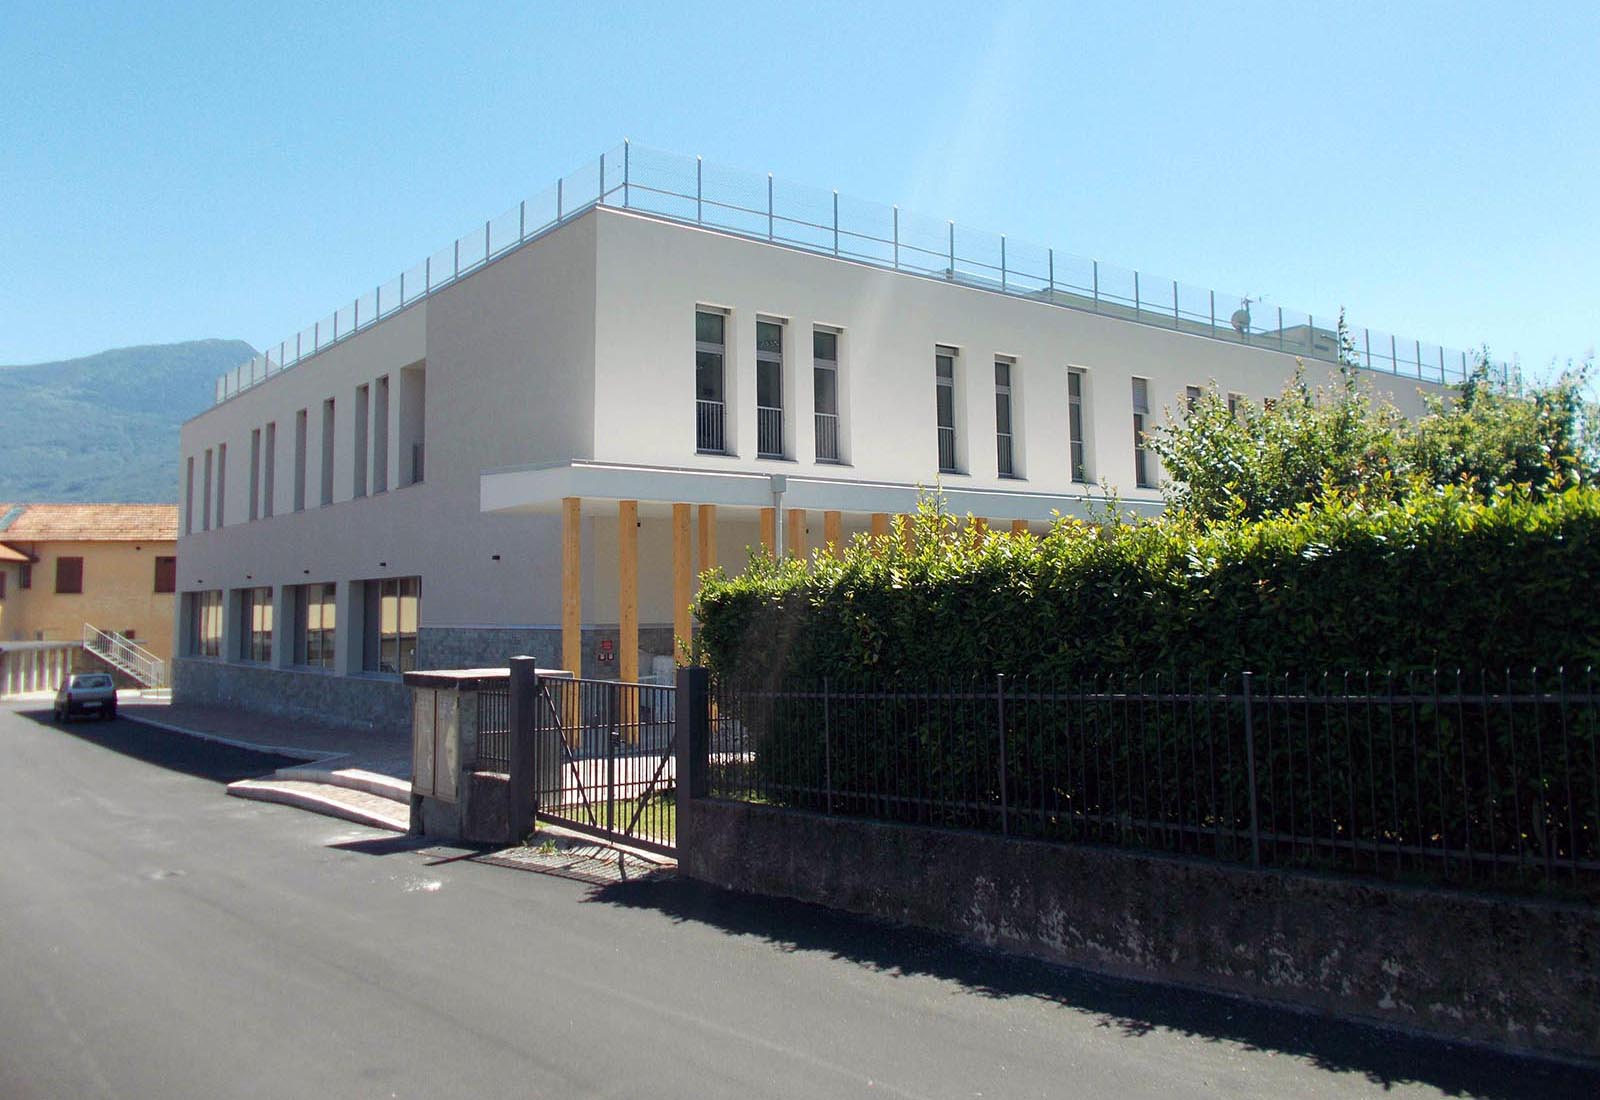 Primary school in Gravedona - View from Guer street